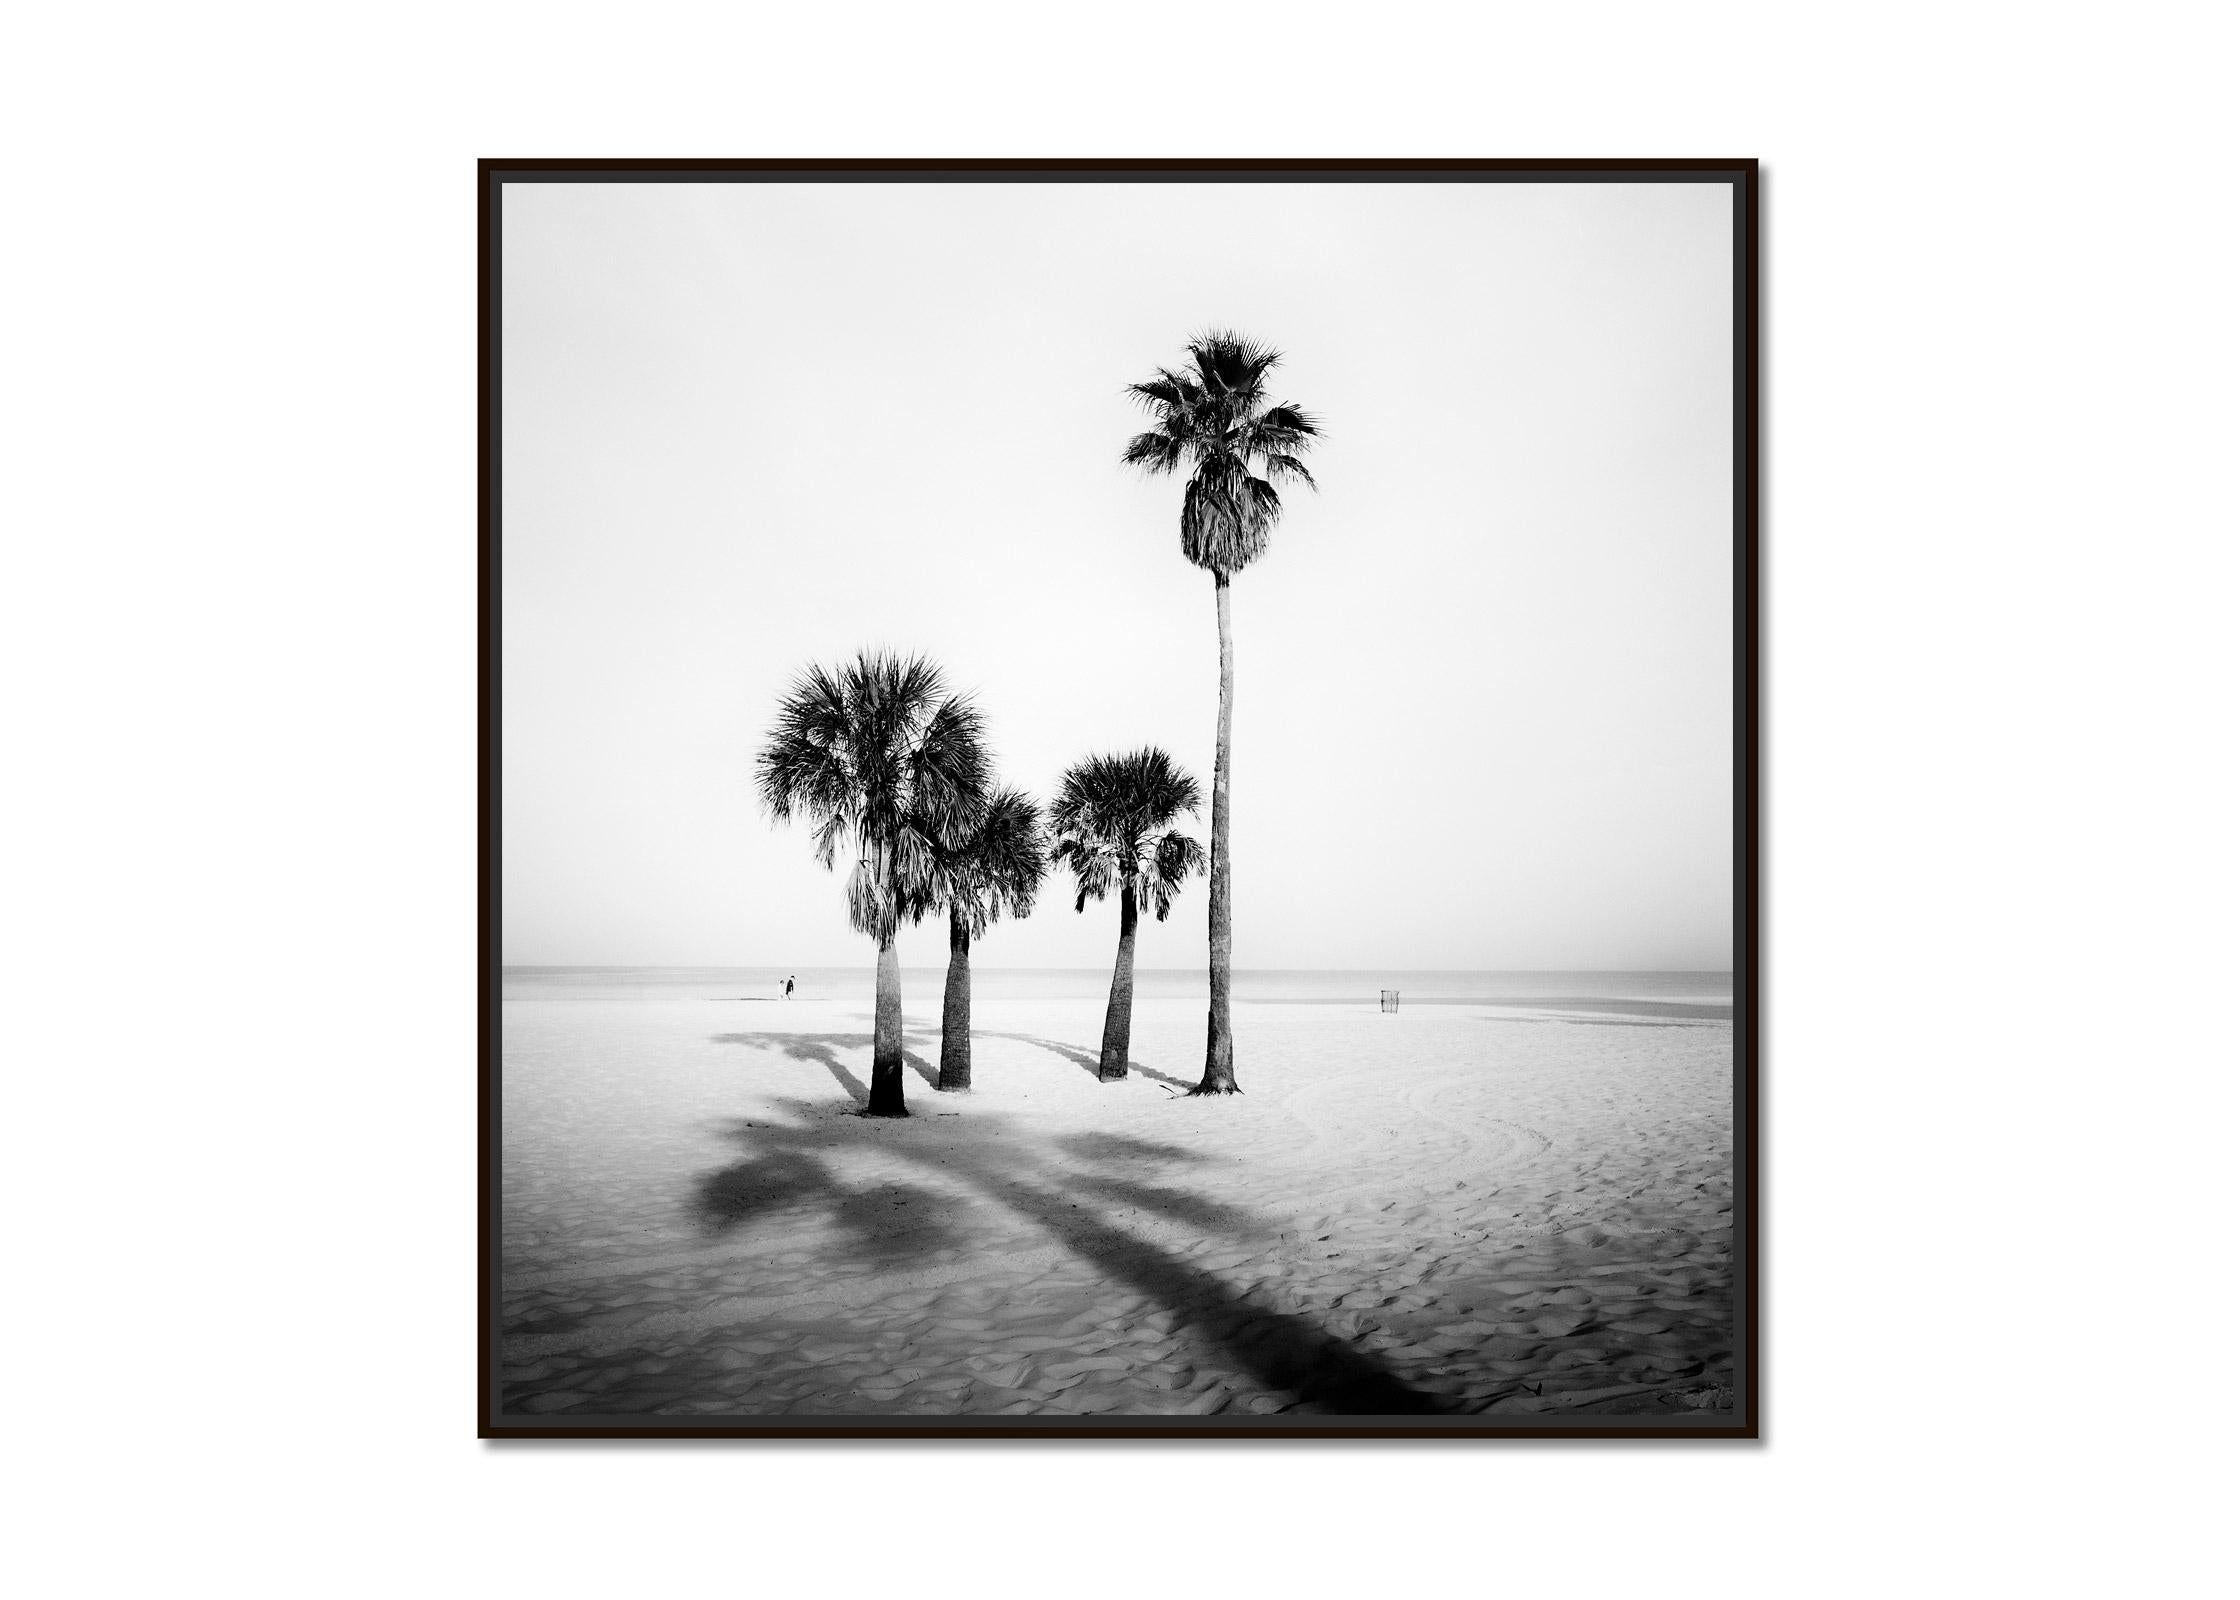 Beach, Morning, Palm Trees, Florida, USA, black and white landscape photography - Photograph by Gerald Berghammer